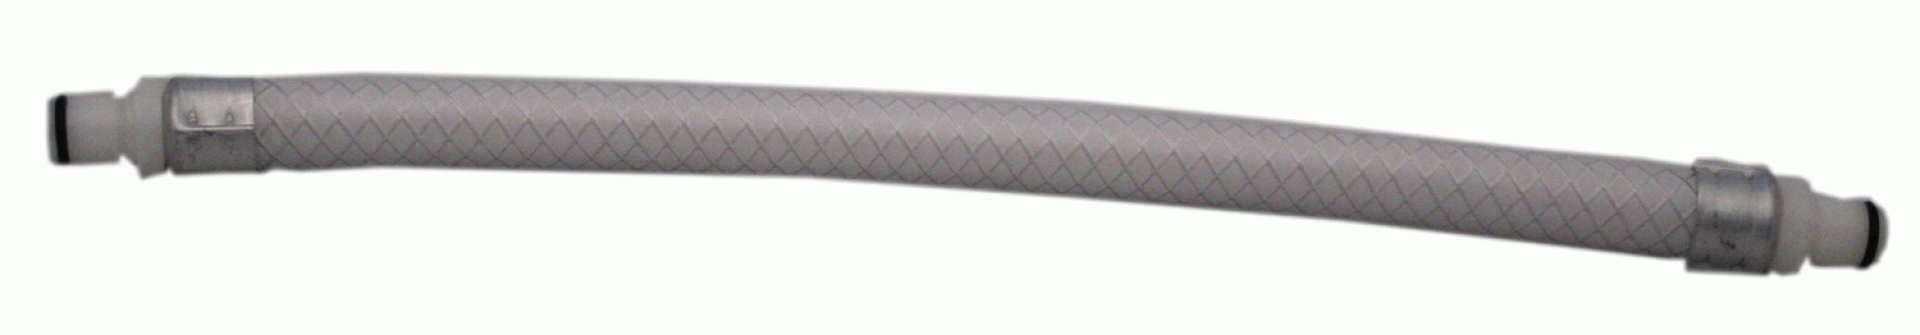 CAMCO MFG INC | 52524 | UNDER COUNTER QUICK CONNECTOR BYPAS HOSE